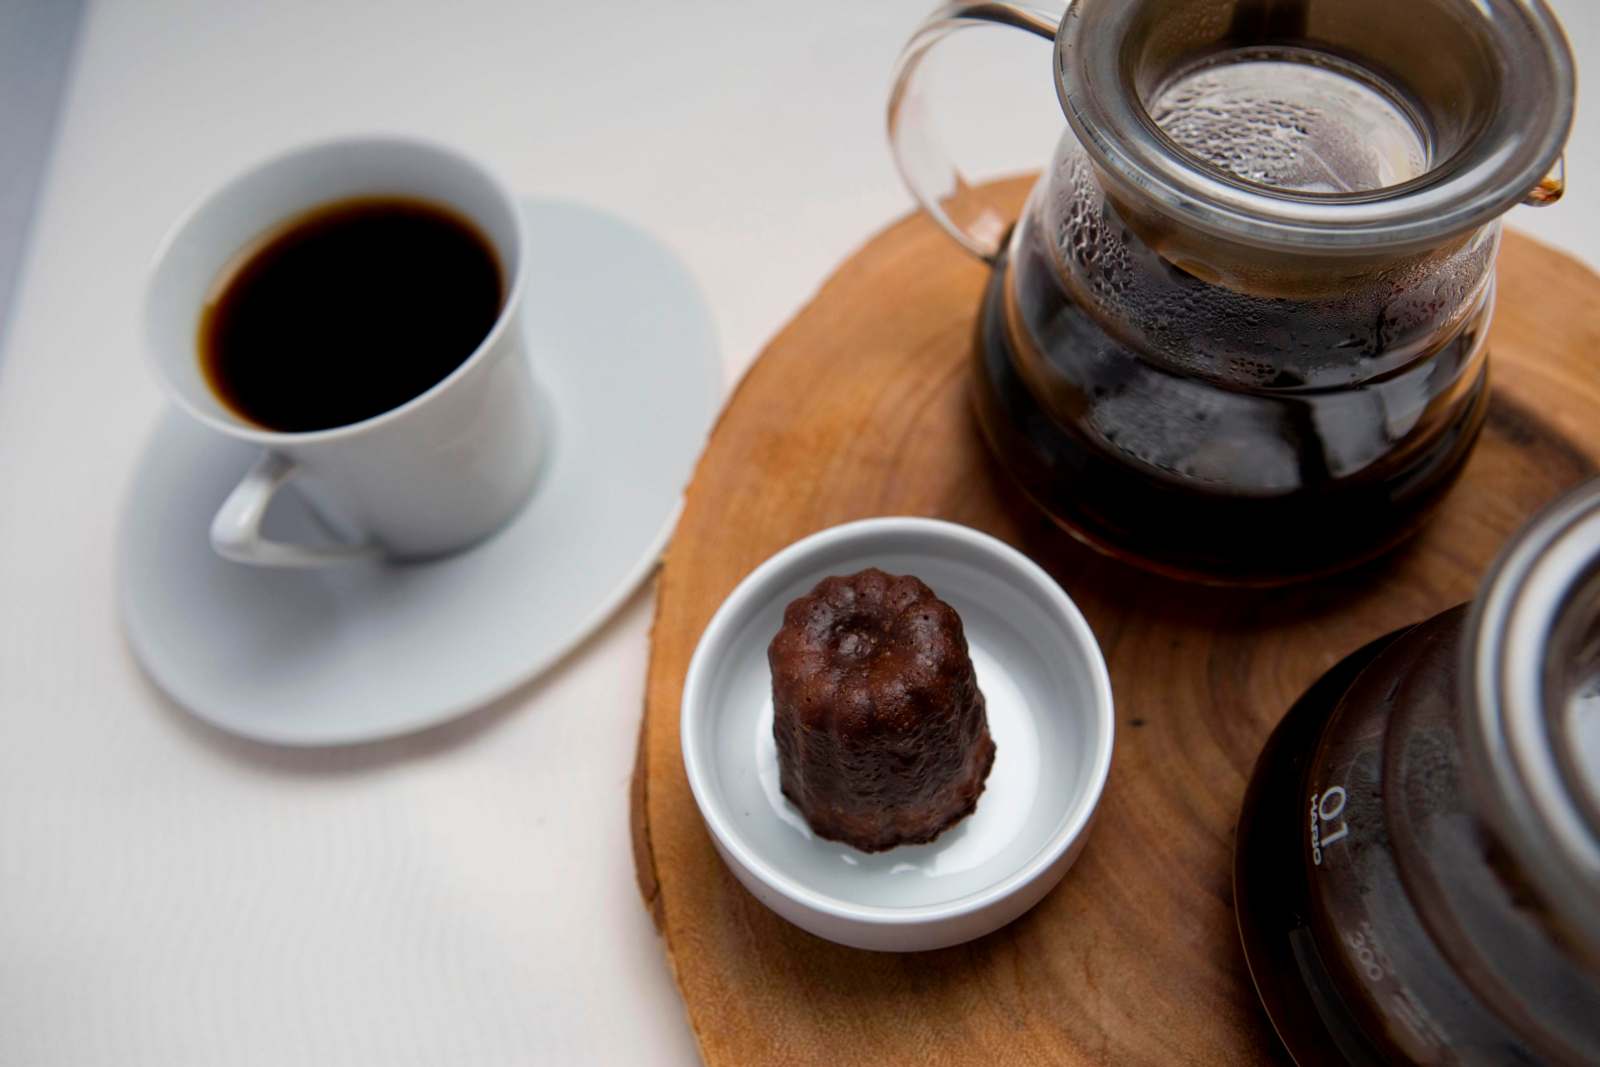 a small chocolate cake in a small white bowl next to a cup of coffee